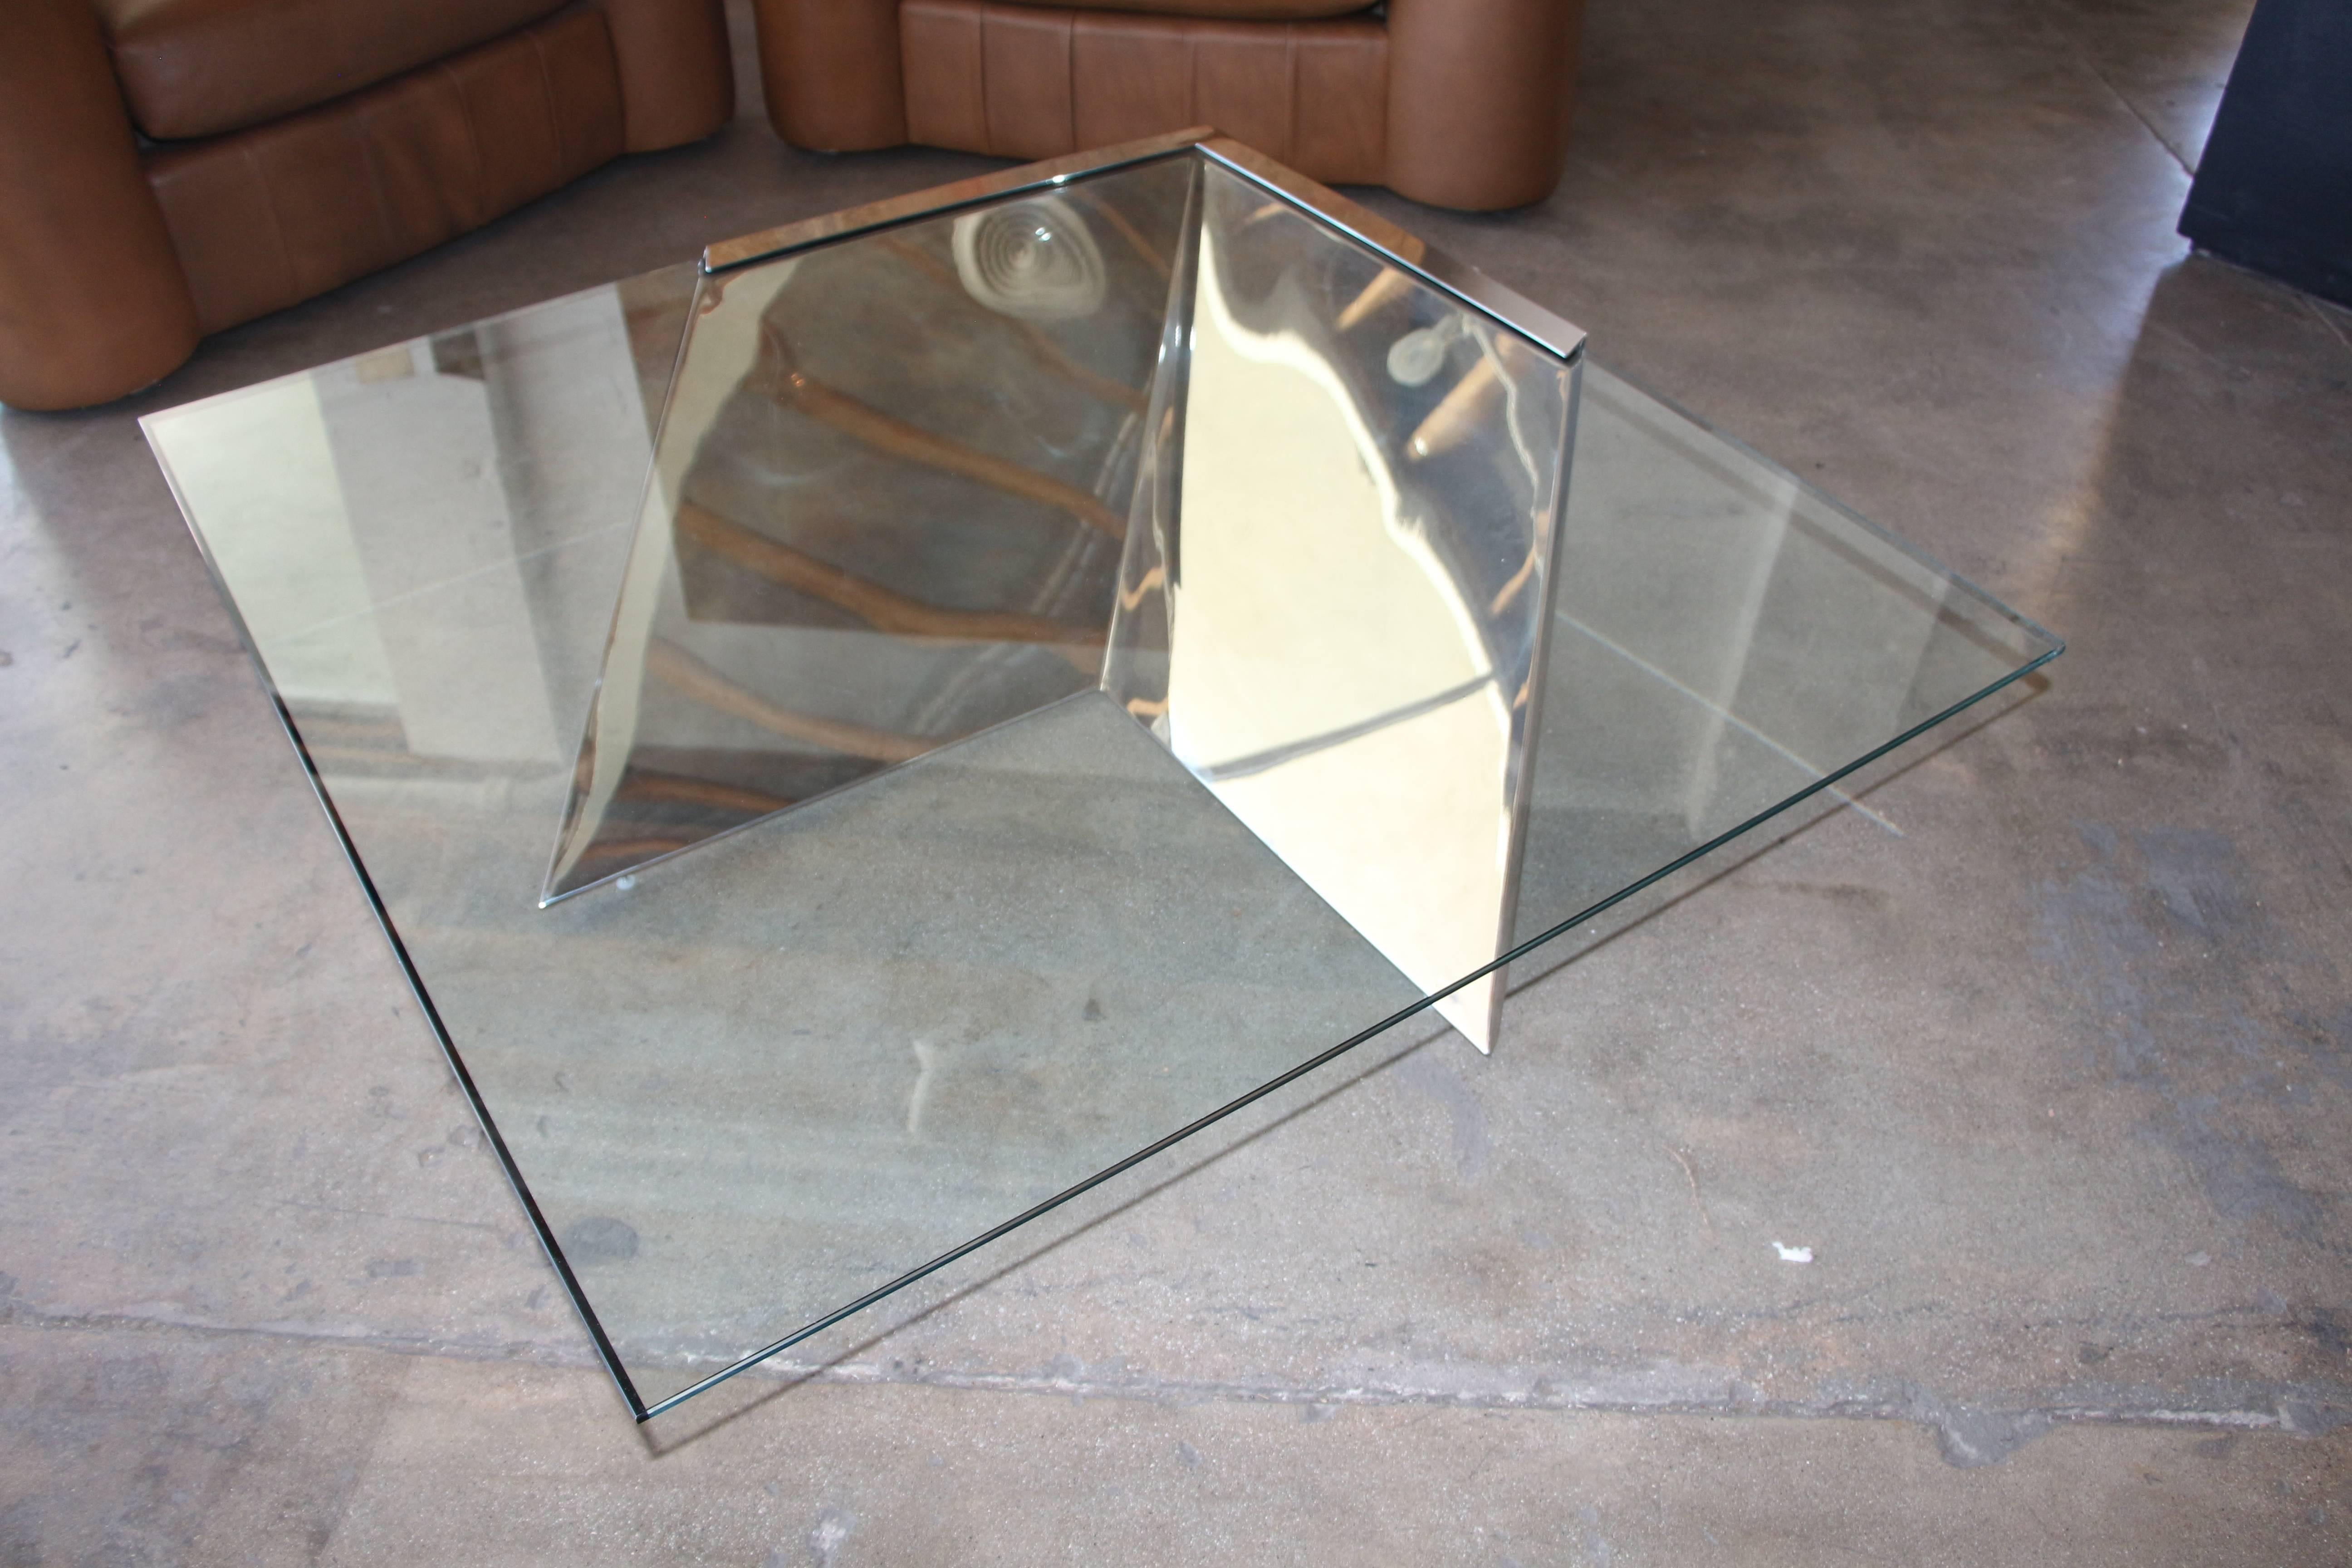 A beautiful polished steel and glass cantilevered coffee table named the SMT. The initials stands for so much trouble, as this is a difficult table to create. This is the correct size and correct glass size built by the manufacture. The glass